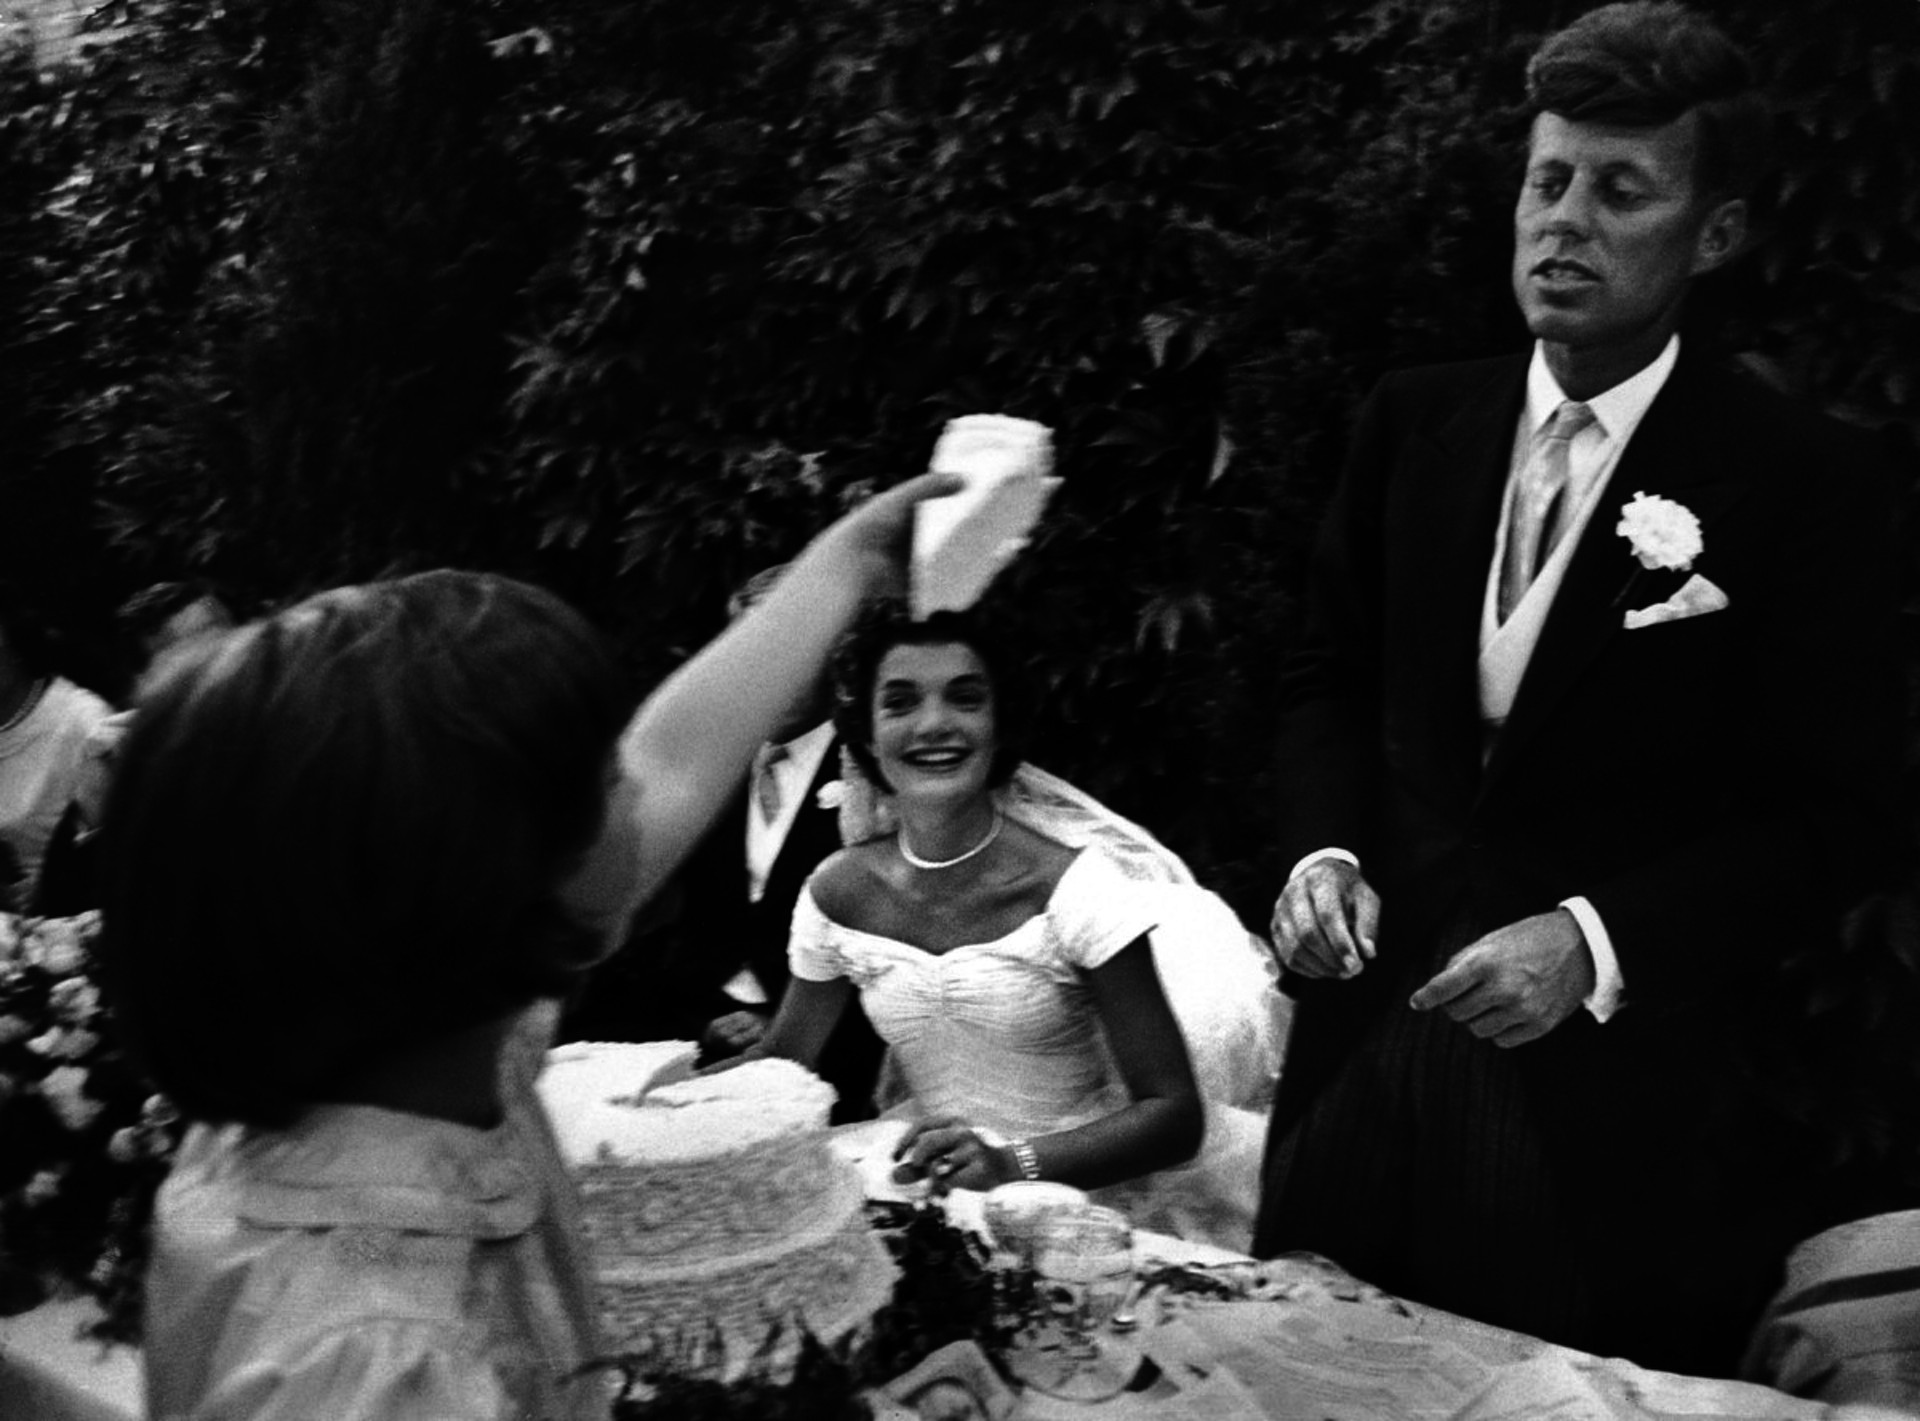 The Wedding of John F. Kennedy and Jacqueline Bouvier, 1953 (22)